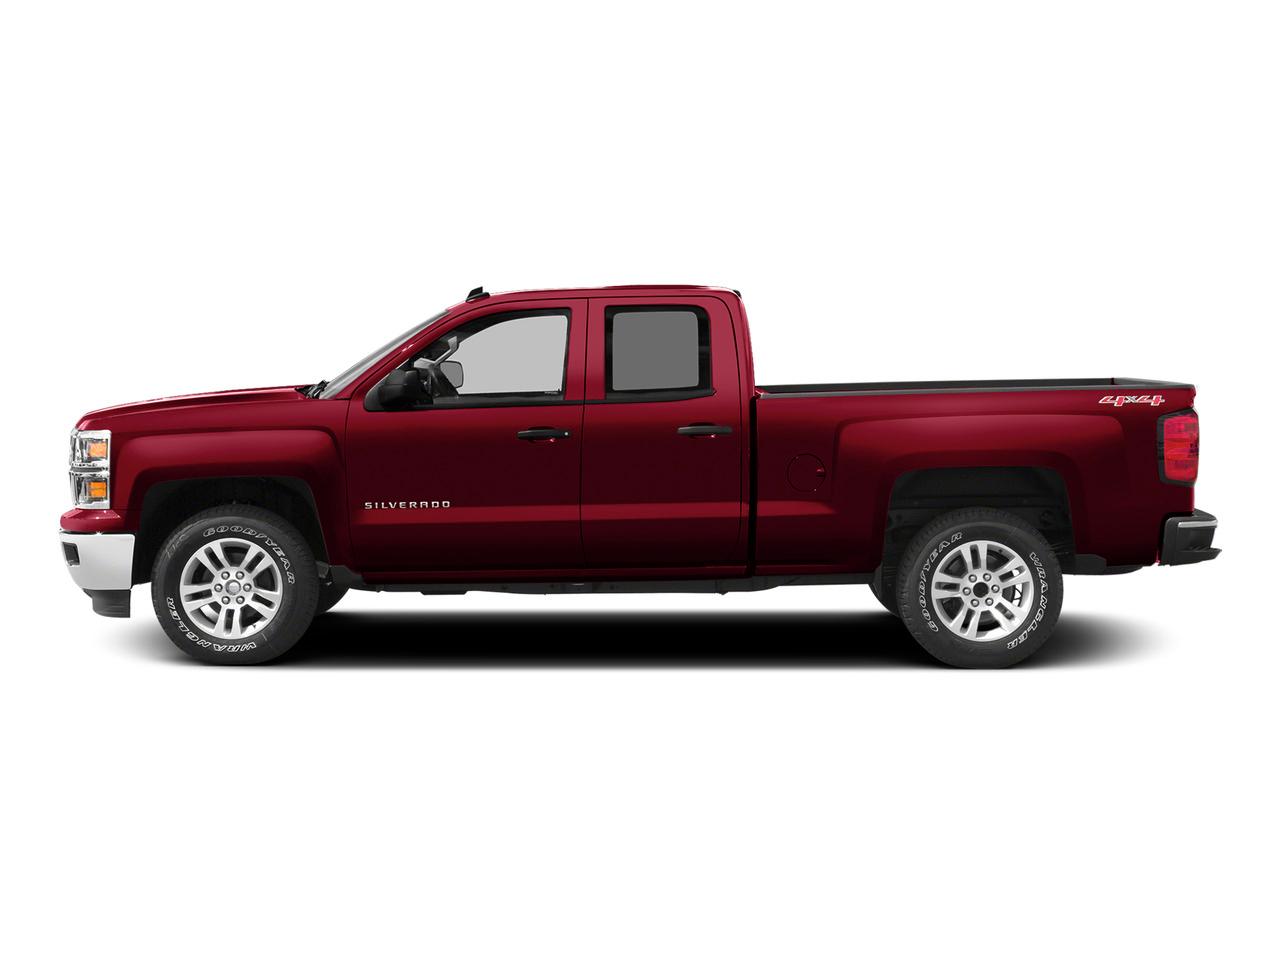 Used 2015 Chevrolet Silverado 1500 Work Truck 1WT with VIN 1GCVKPEC5FZ154400 for sale in Red Wing, Minnesota